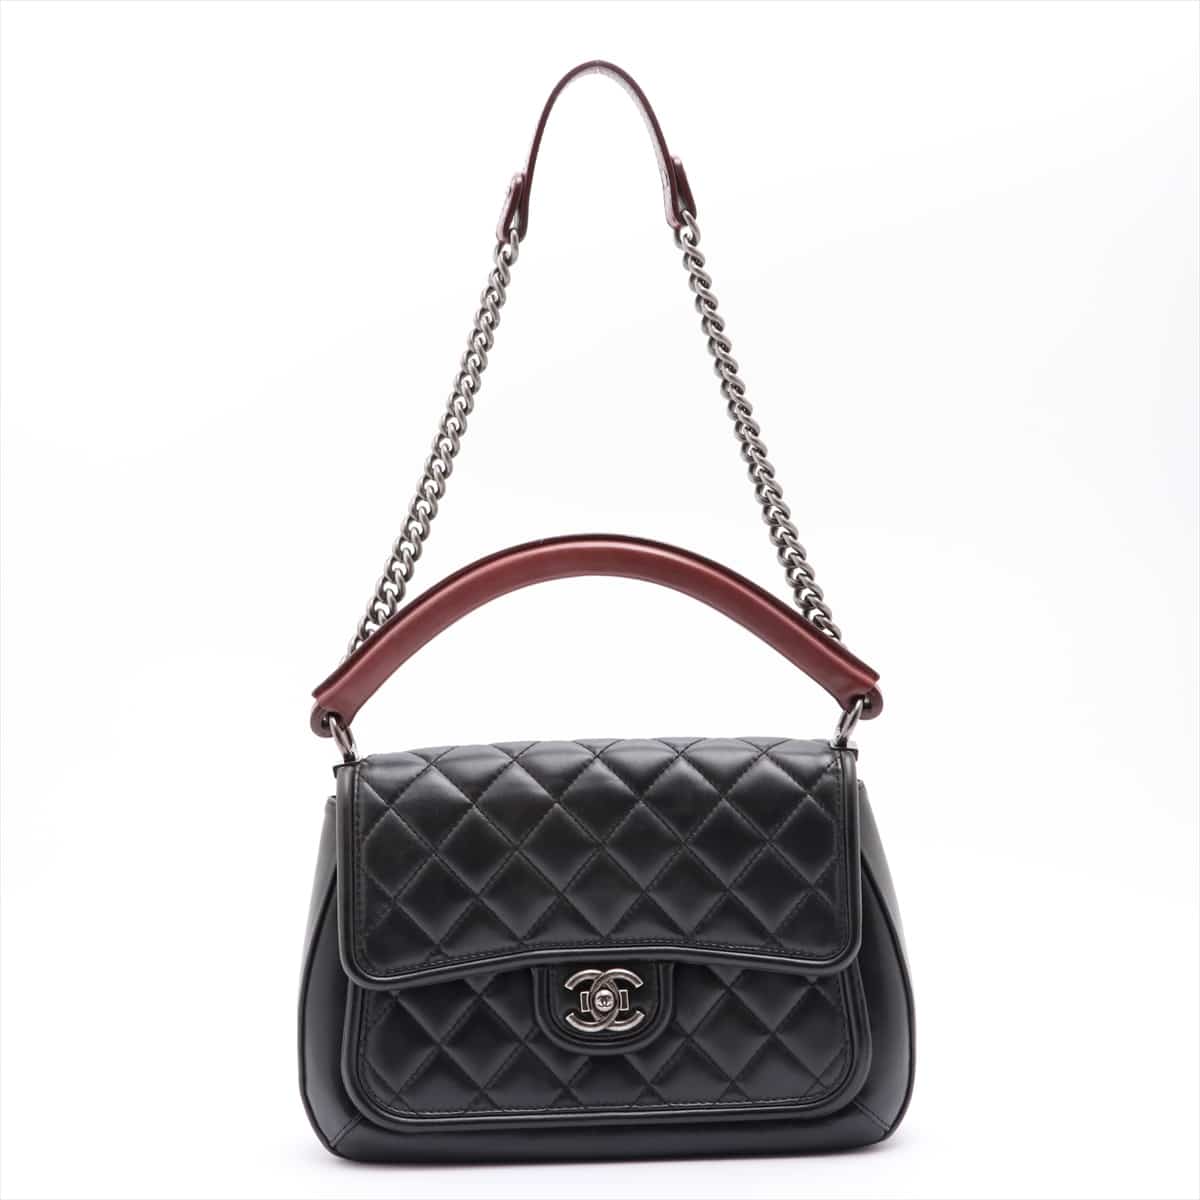 Chanel Coco Mark Lambskin Chain shoulder bag Black Silver Metal fittings 21XXXXXX Steering wheel base solid